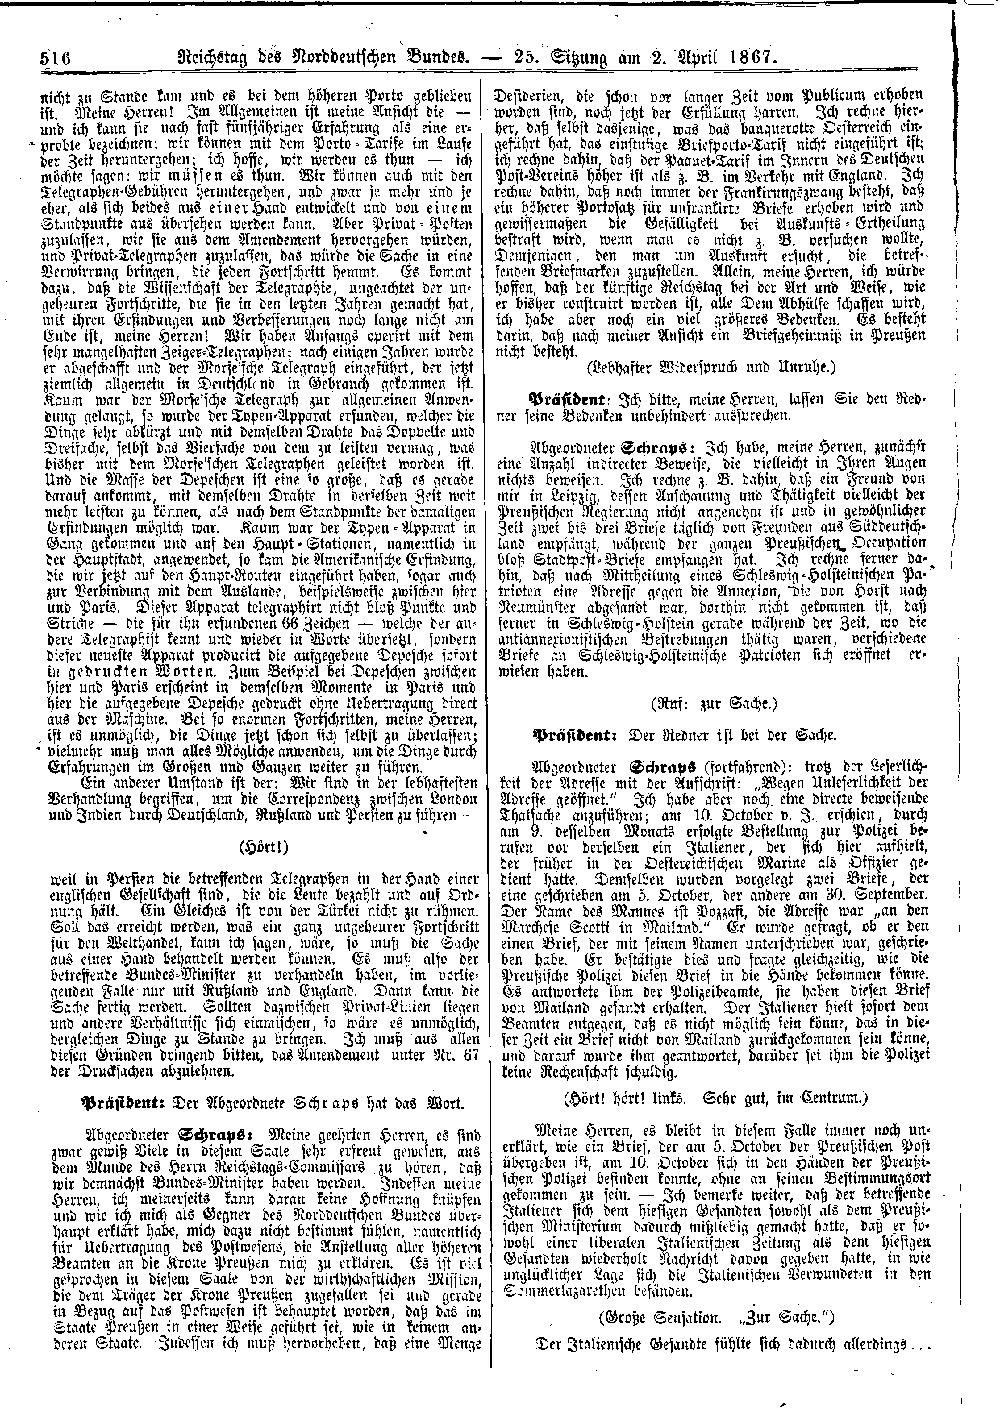 Scan of page 516